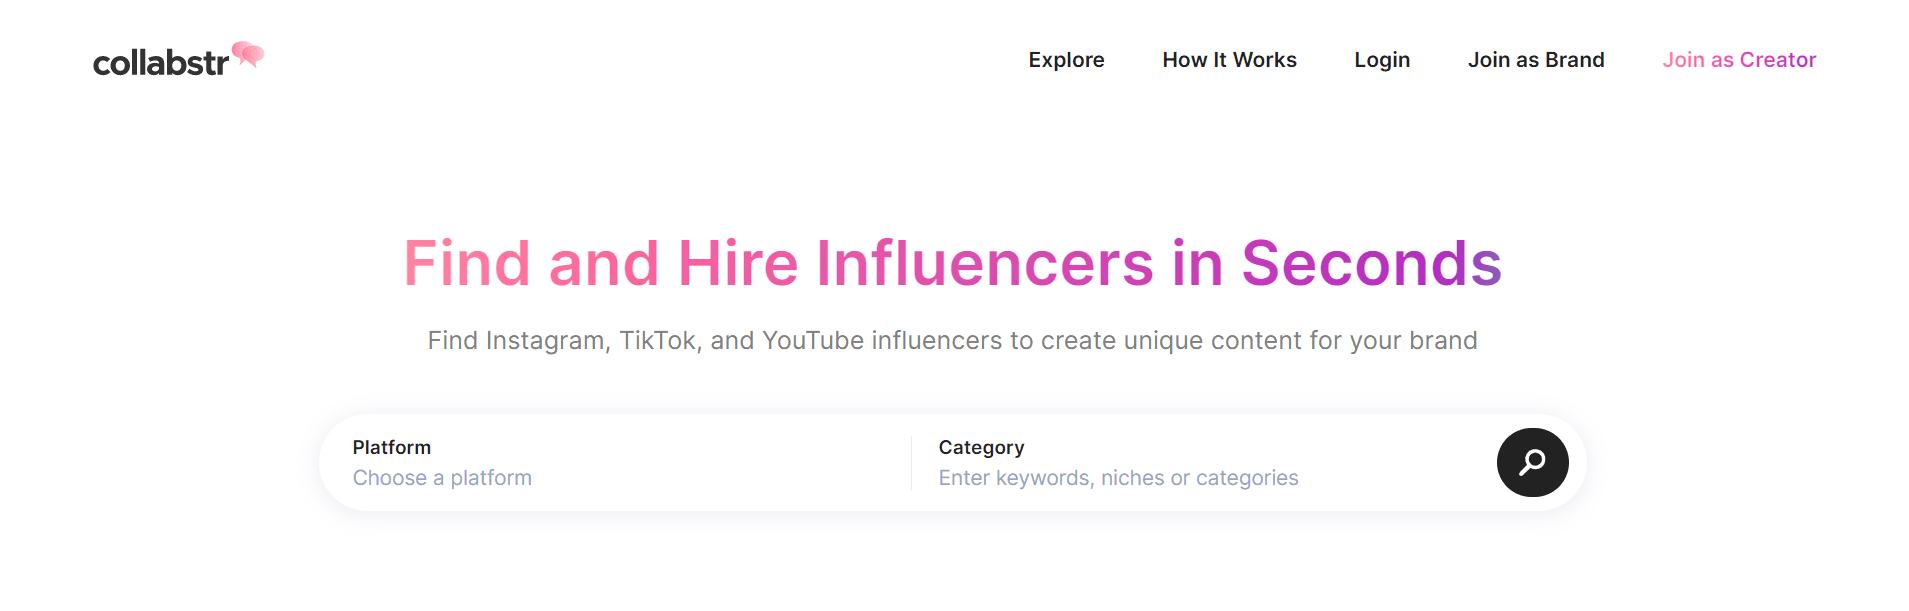 collabstr fire and hire influencers